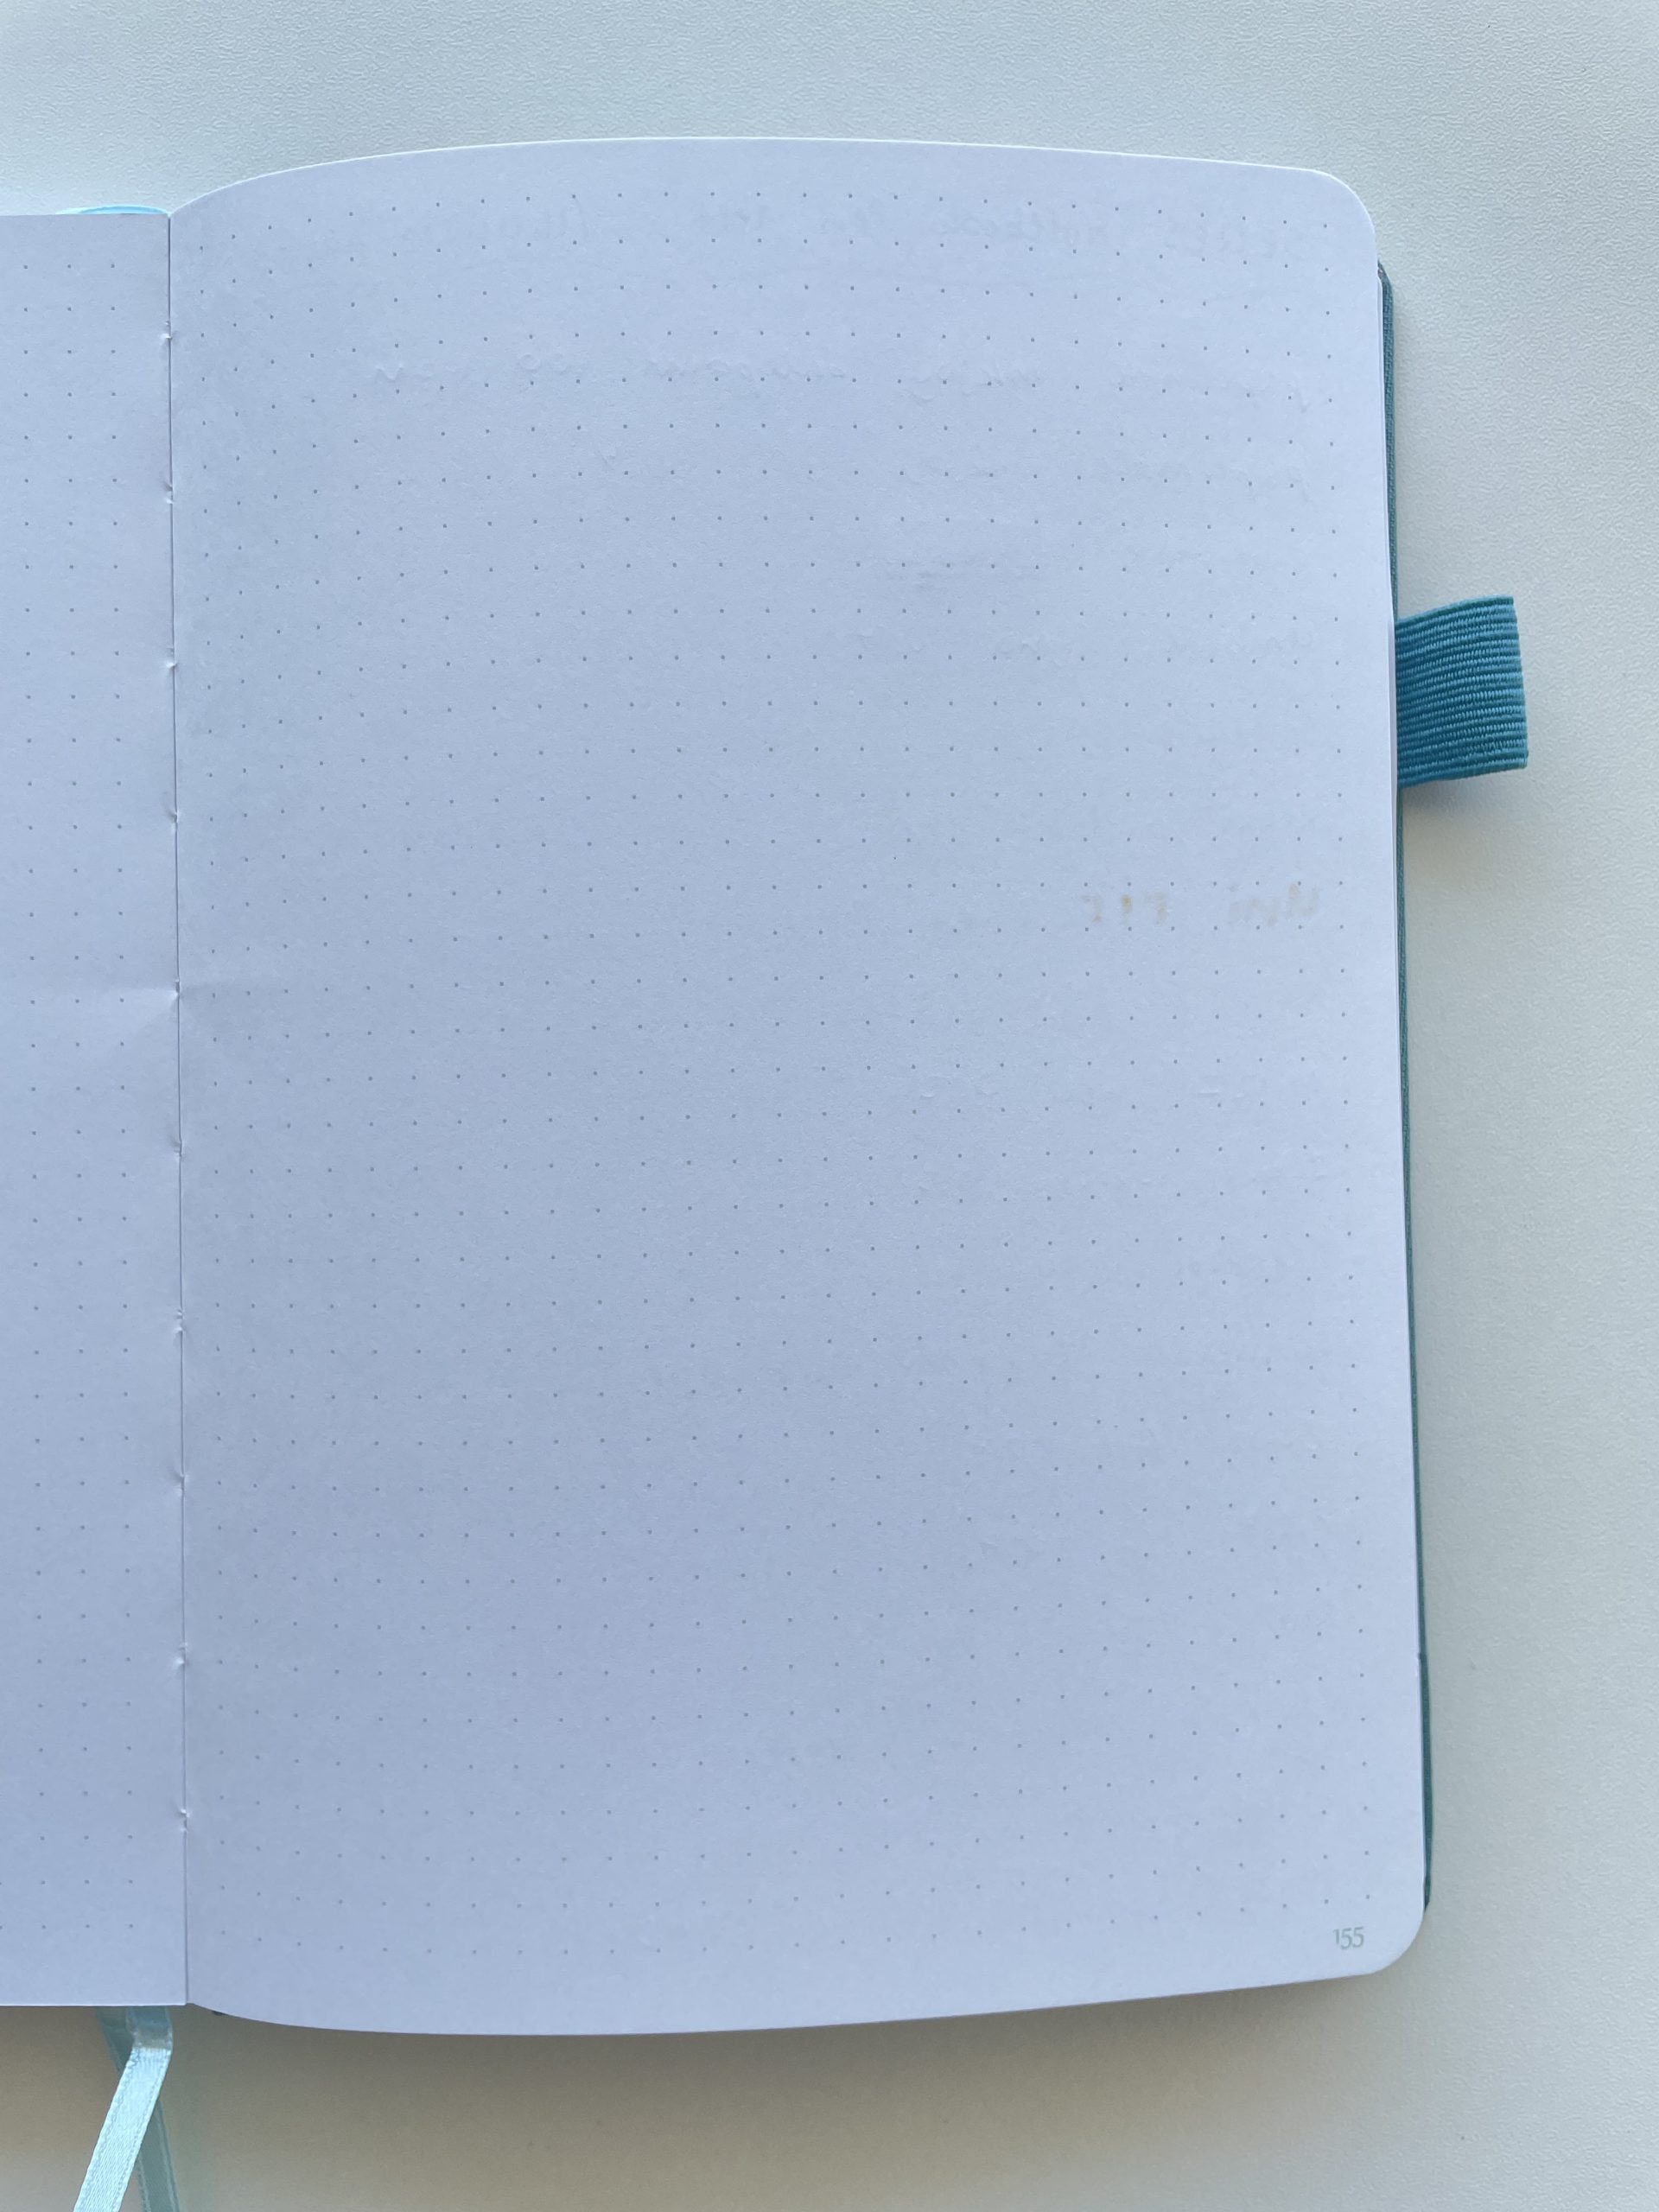 seqes notebook review pen test pros and cons bright white 160 gsm paper 5mm dot grid